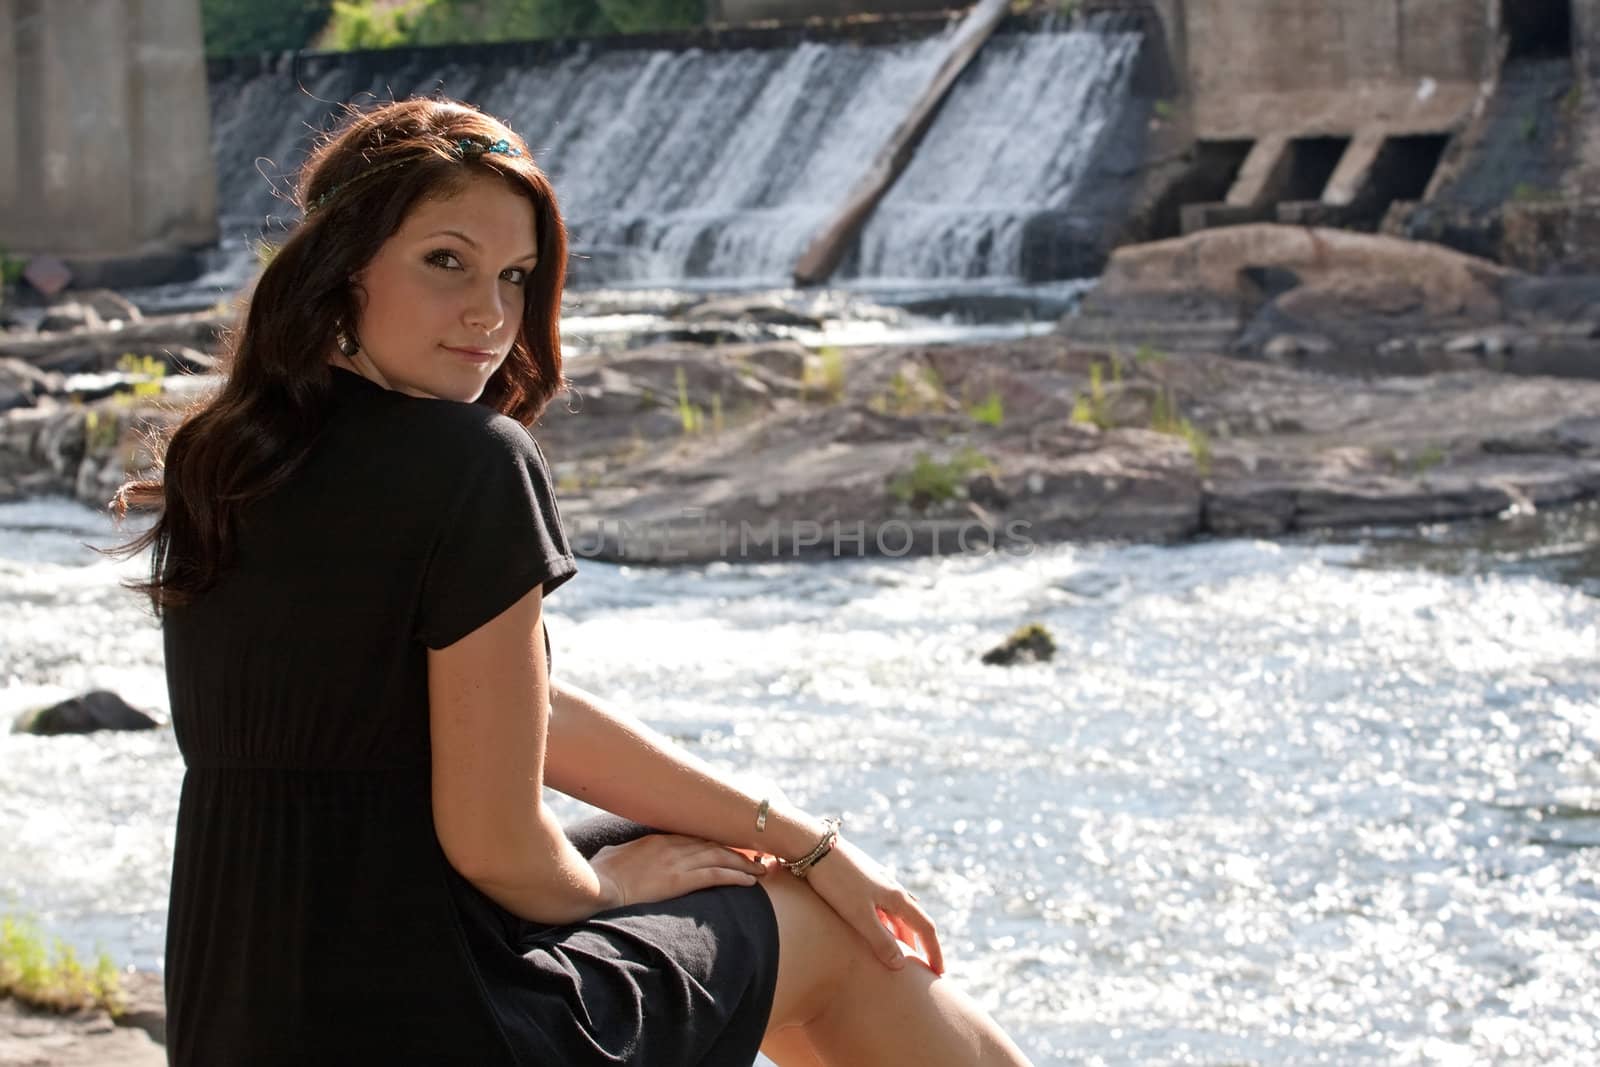 An attractive young woman wearing a black dress sitting by a river.